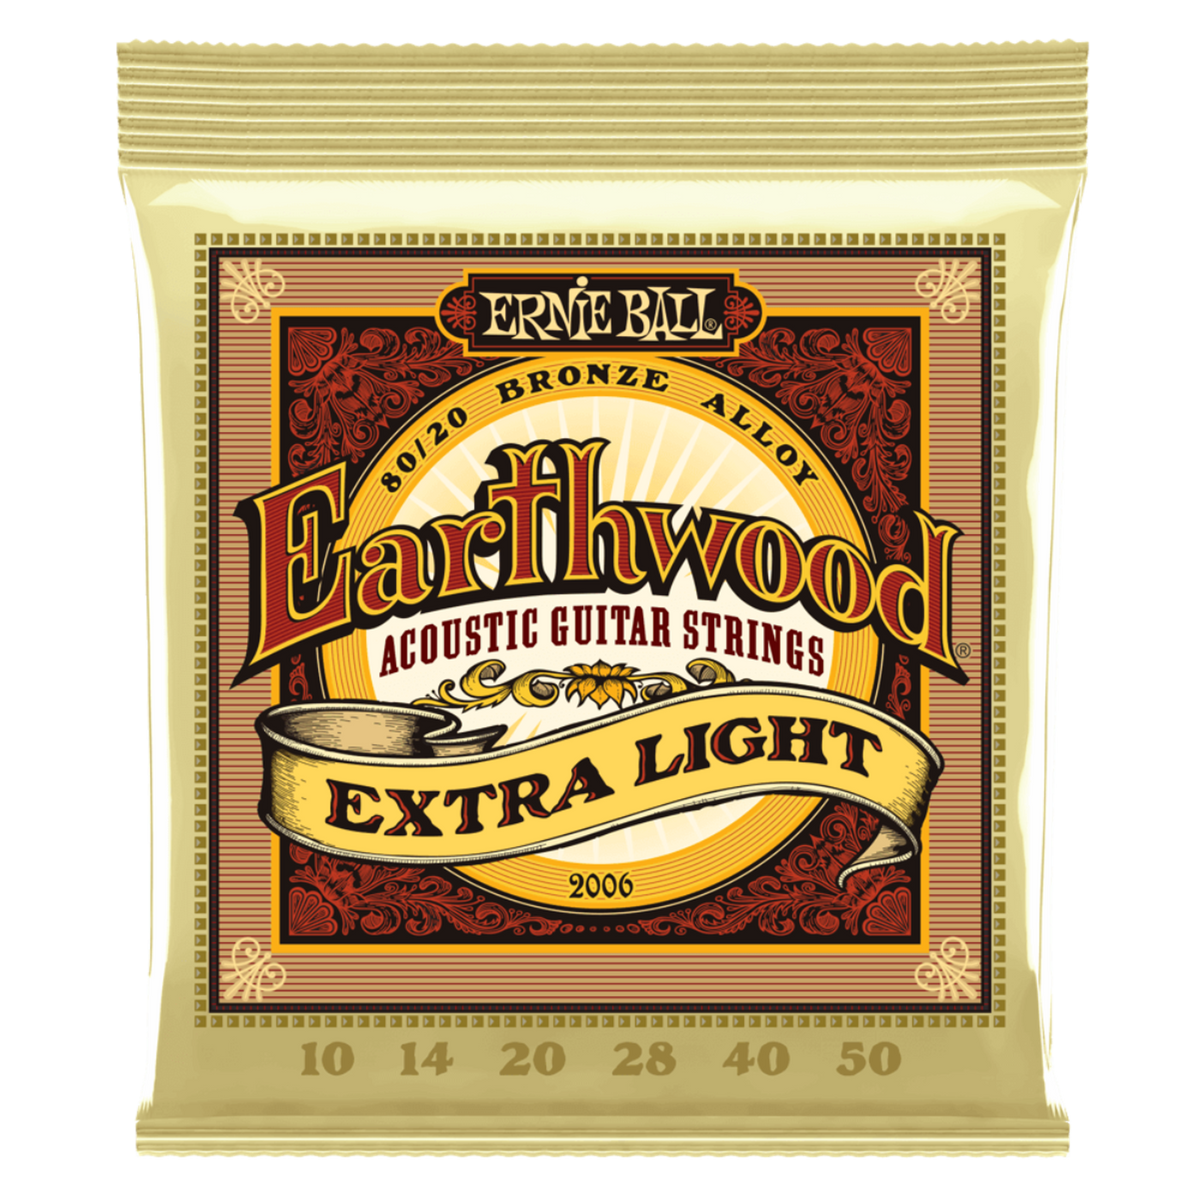 The Earnie Ball Earthwood Acoustic Guitar String set are the most popular acoustic guitar strings provide a crisp, ringing sound with pleasing overtones.